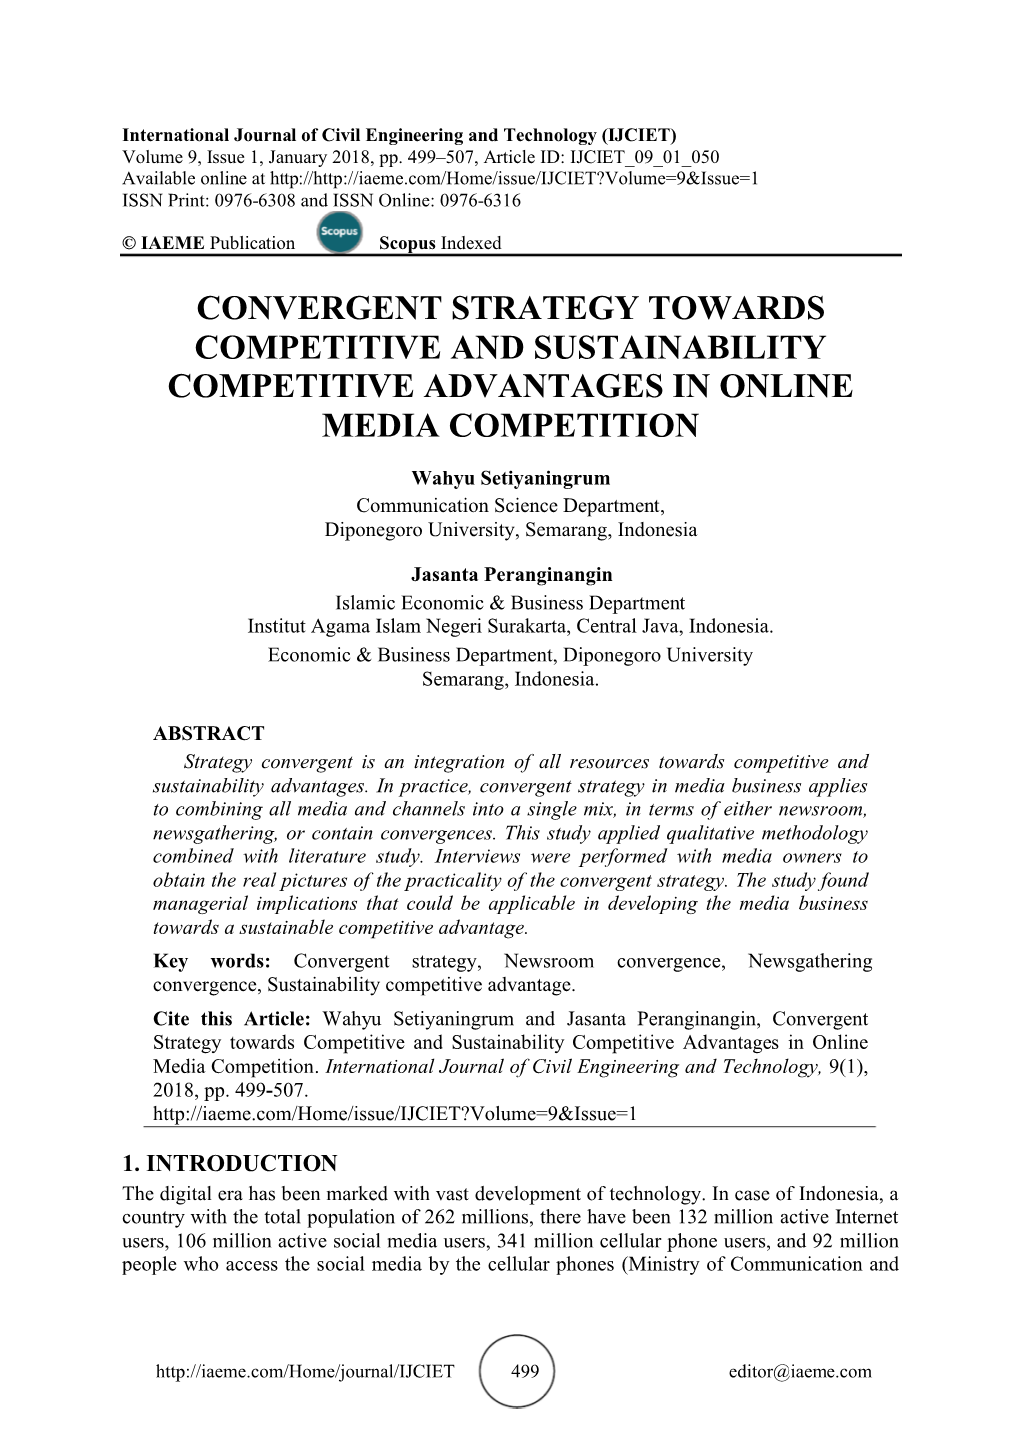 Convergent Strategy Towards Competitive and Sustainability Competitive Advantages in Online Media Competition